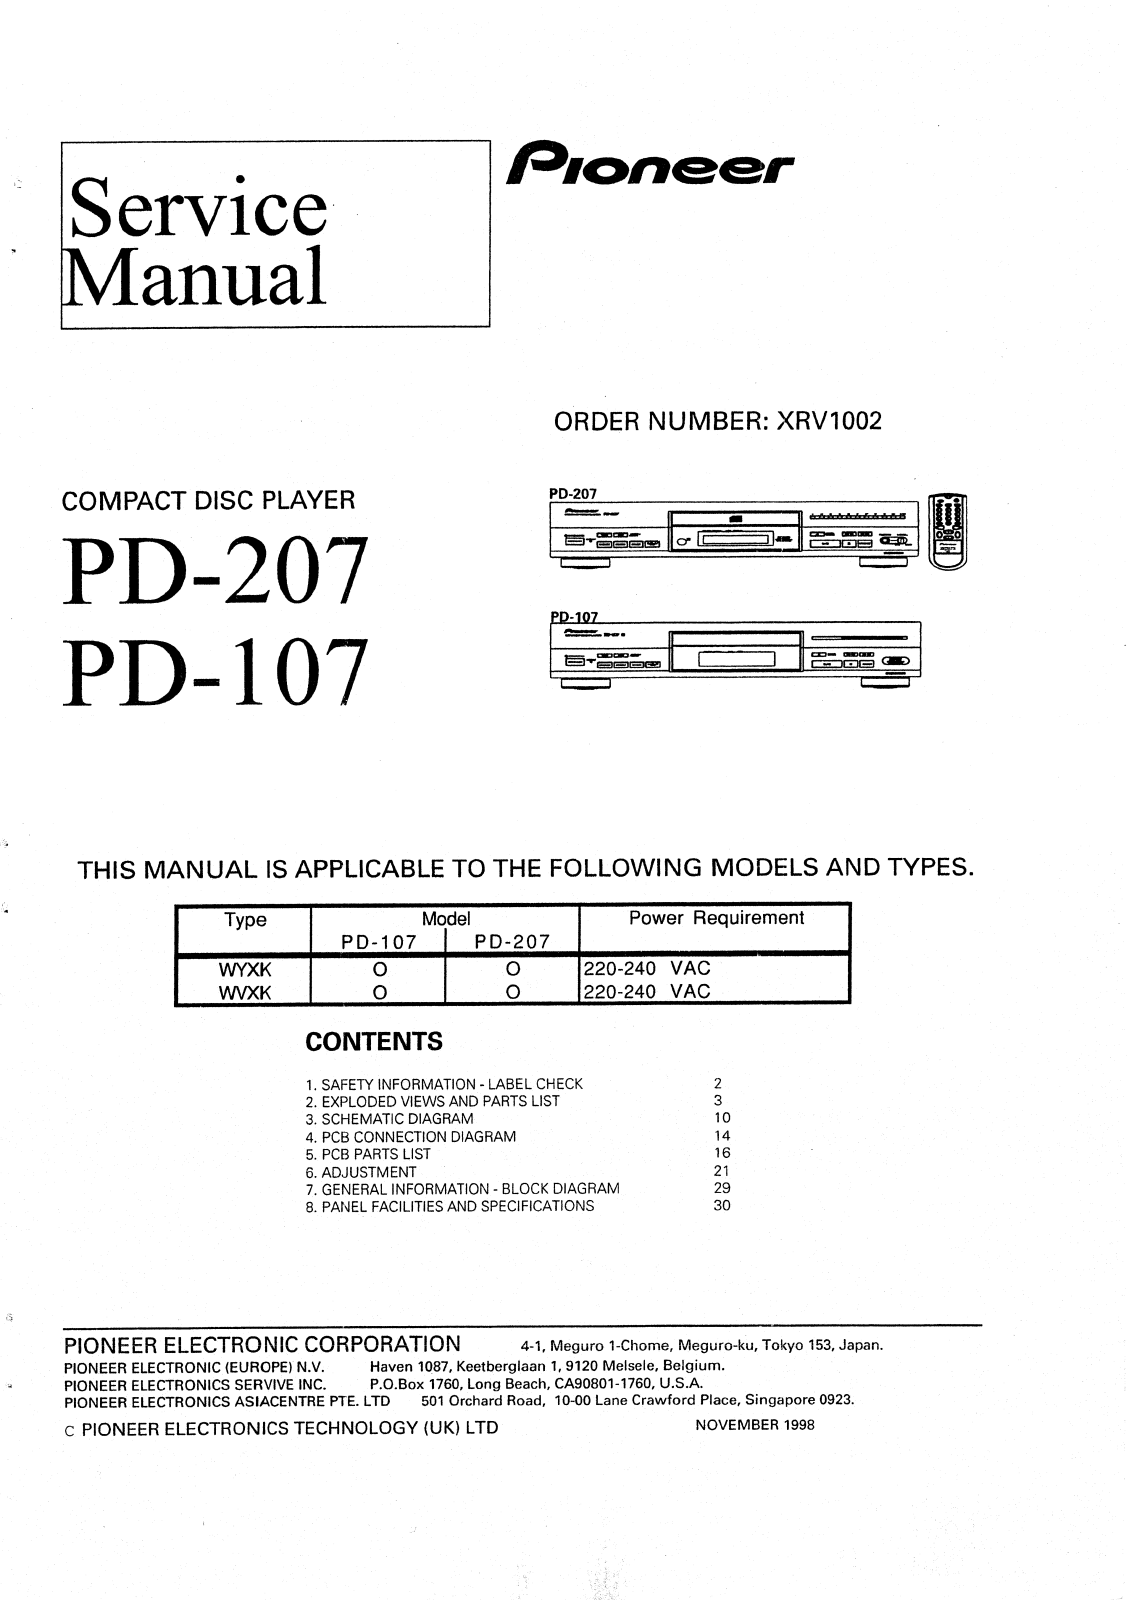 Pioneer PD-107, PD-207 Service manual